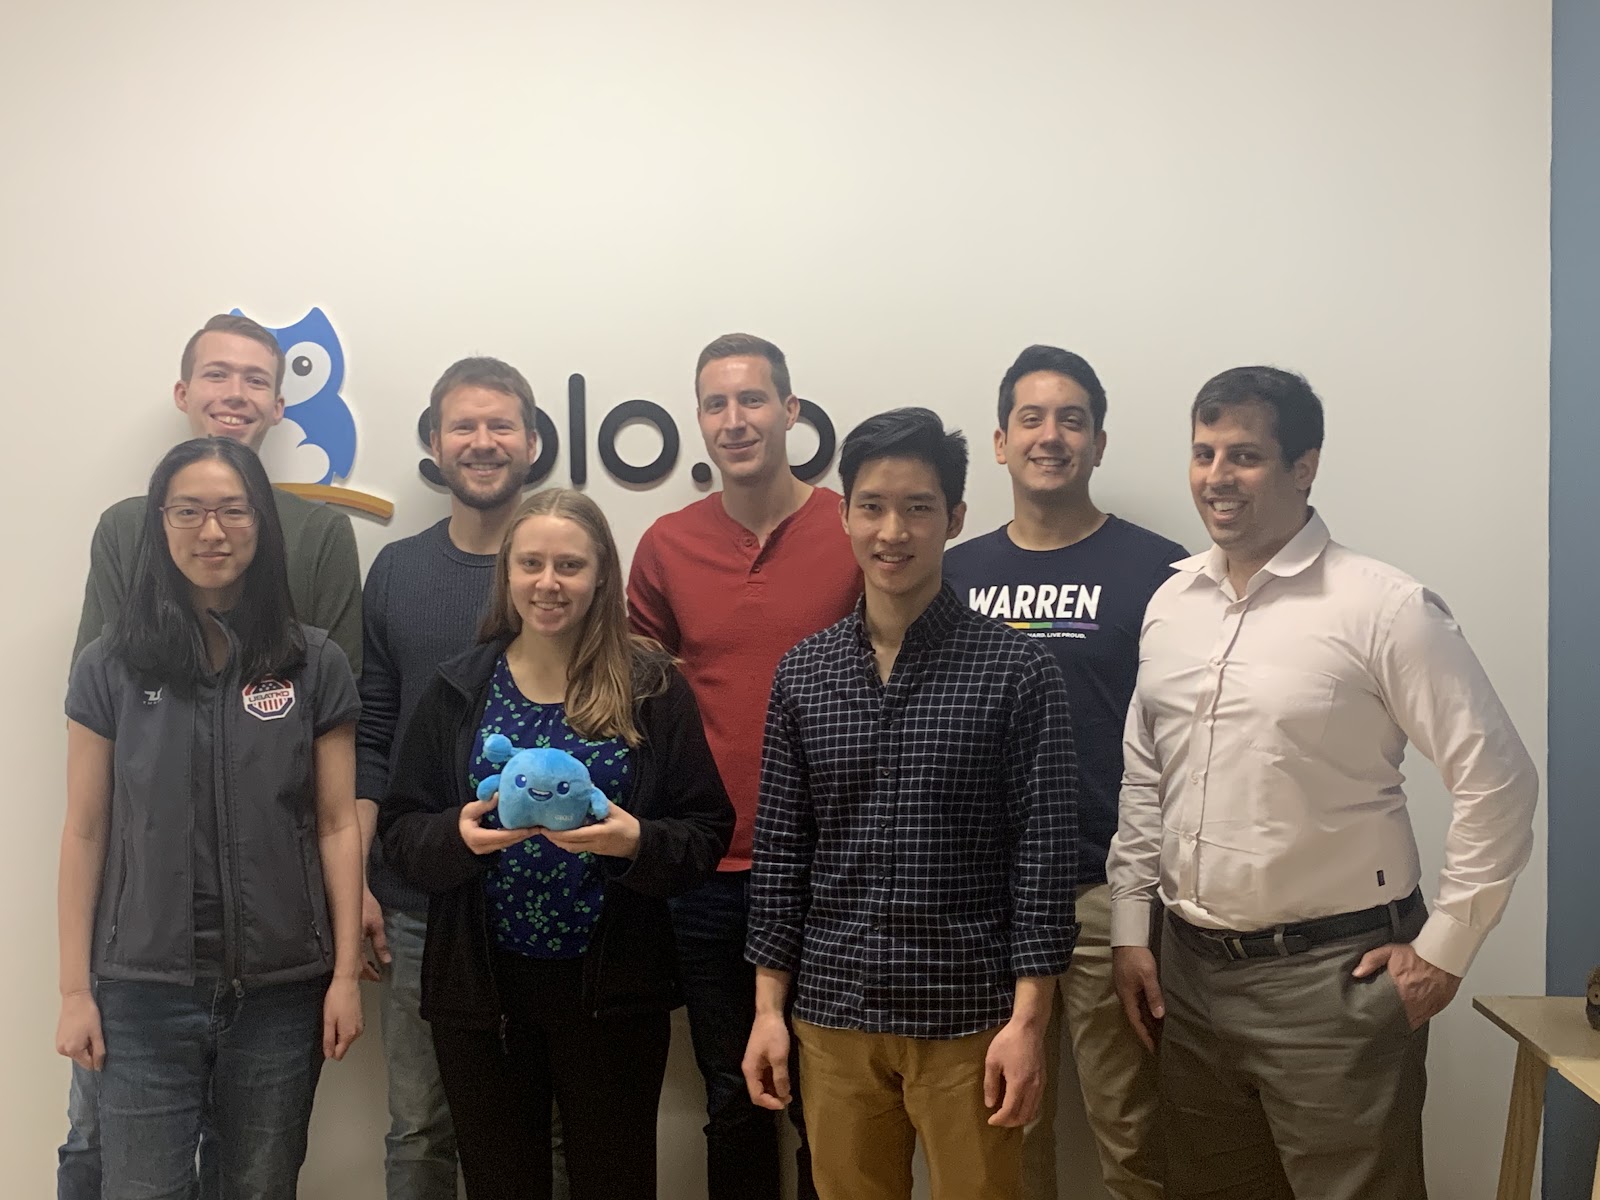 Solo.io’s team gathers for a group photo next to the company’s logo